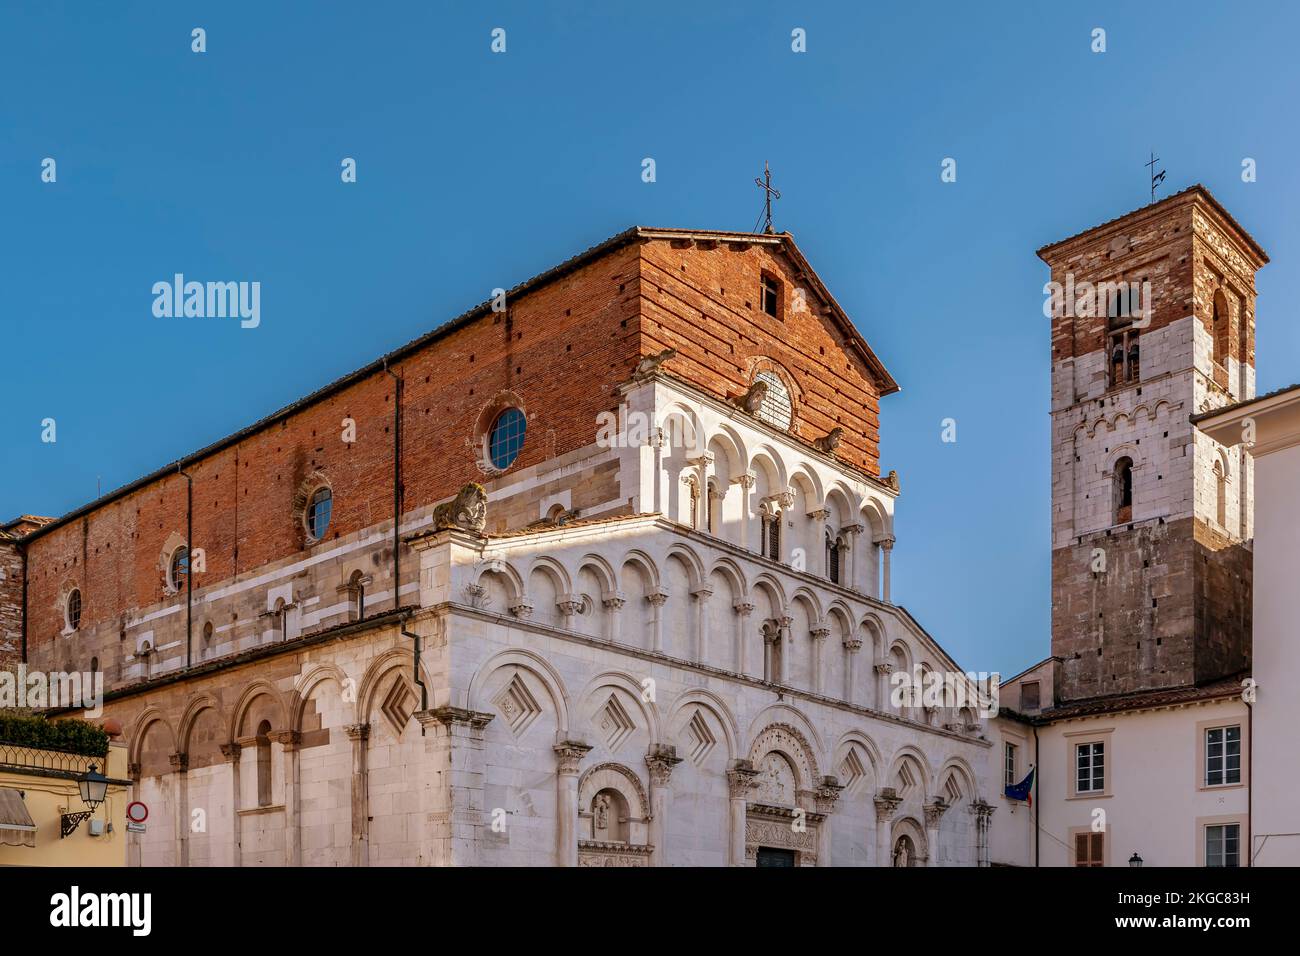 The Church of Santa Maria Forisportam in the historic center of Lucca, Italy, on a sunny day Stock Photo